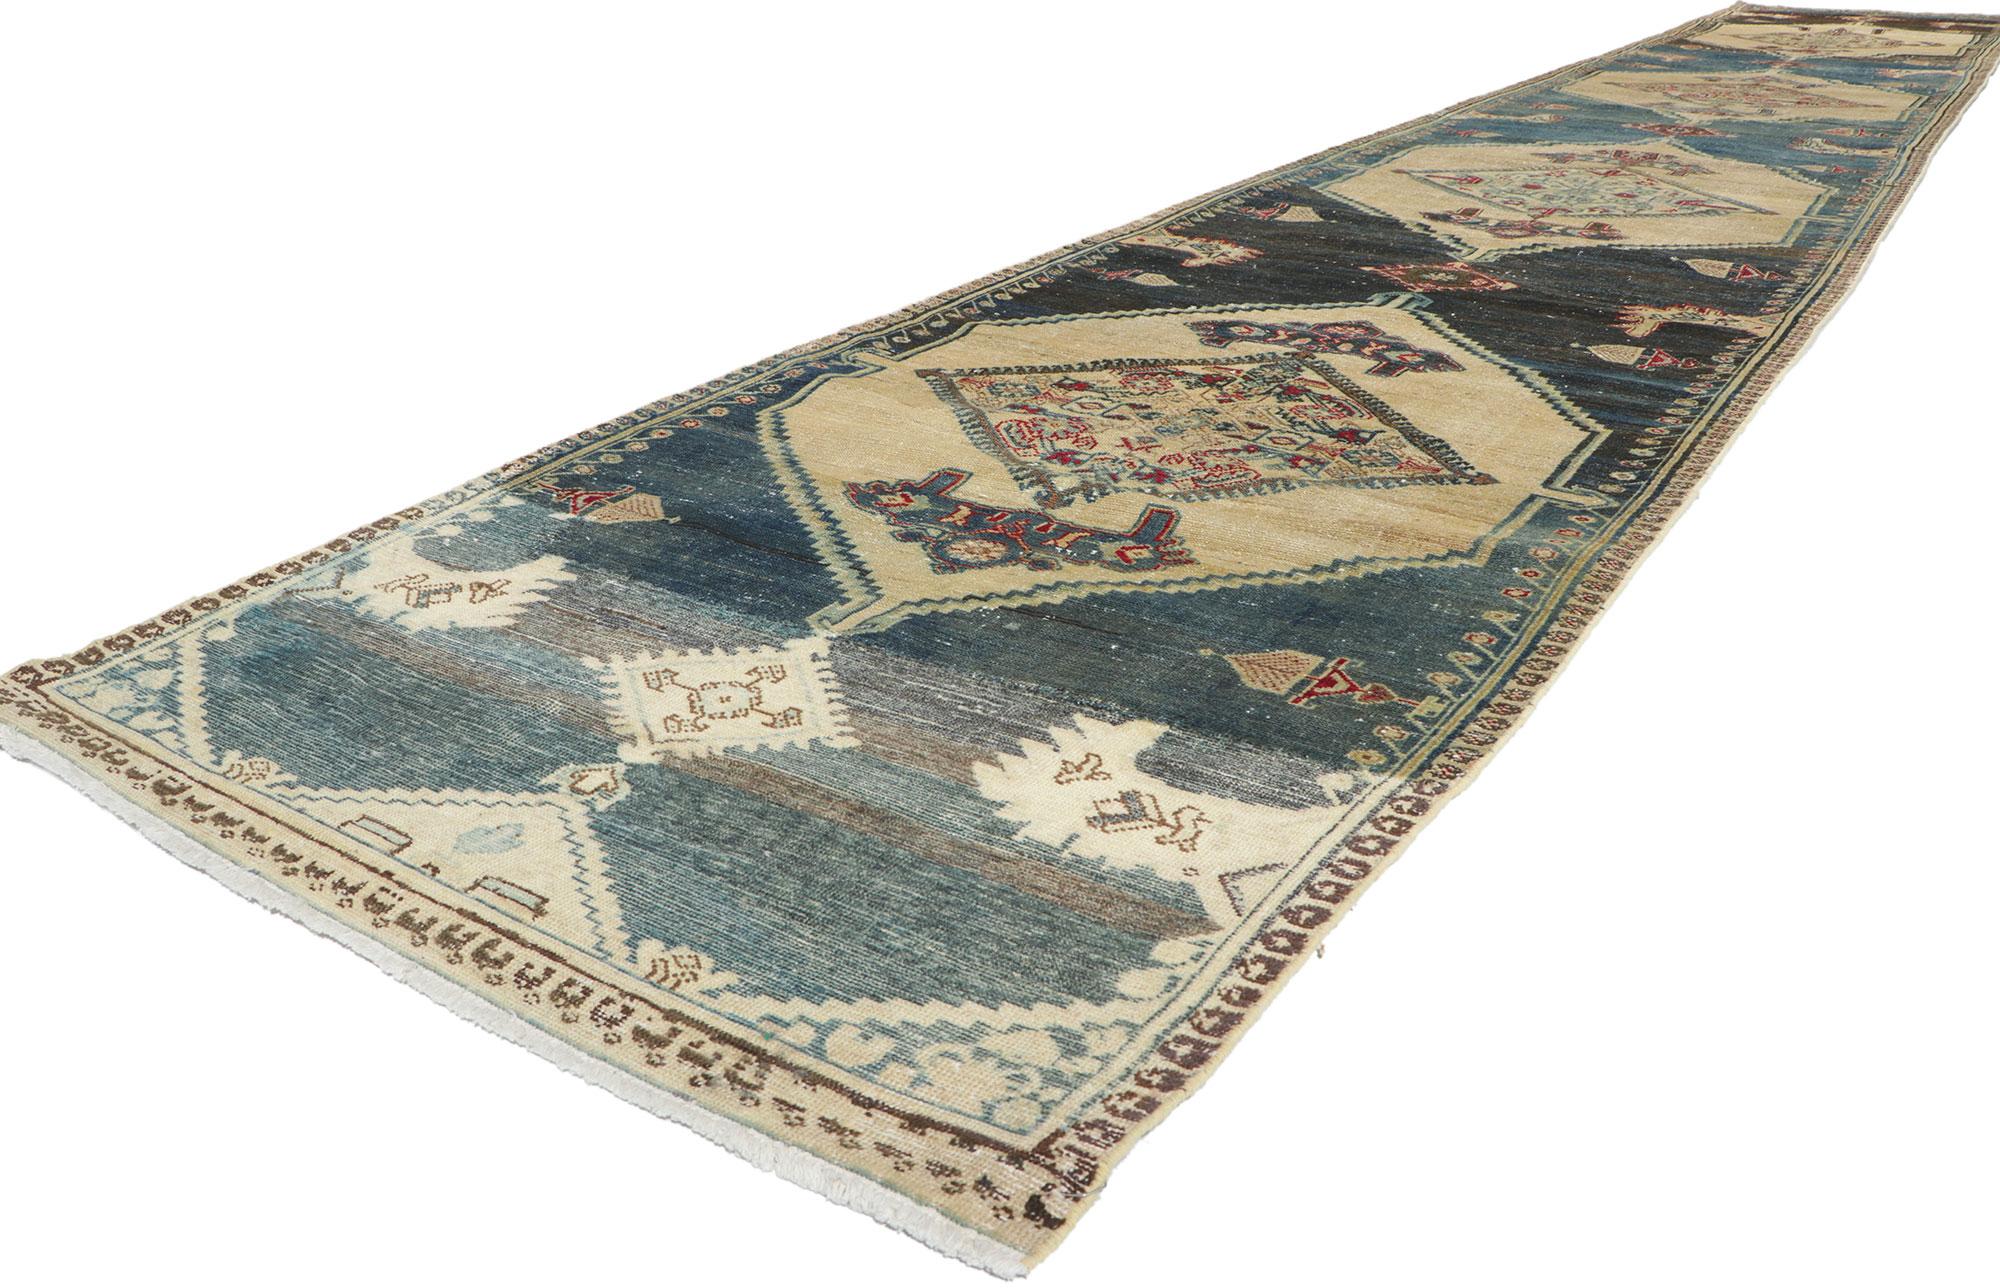 60949 Distressed Antique Persian Malayer Hallway Runner 03'05 x 22'01. With its nomadic charm and rugged beauty, this hand knotted wool distressed antique Persian Malayer runner will take on a curated lived-in look that feels timeless while